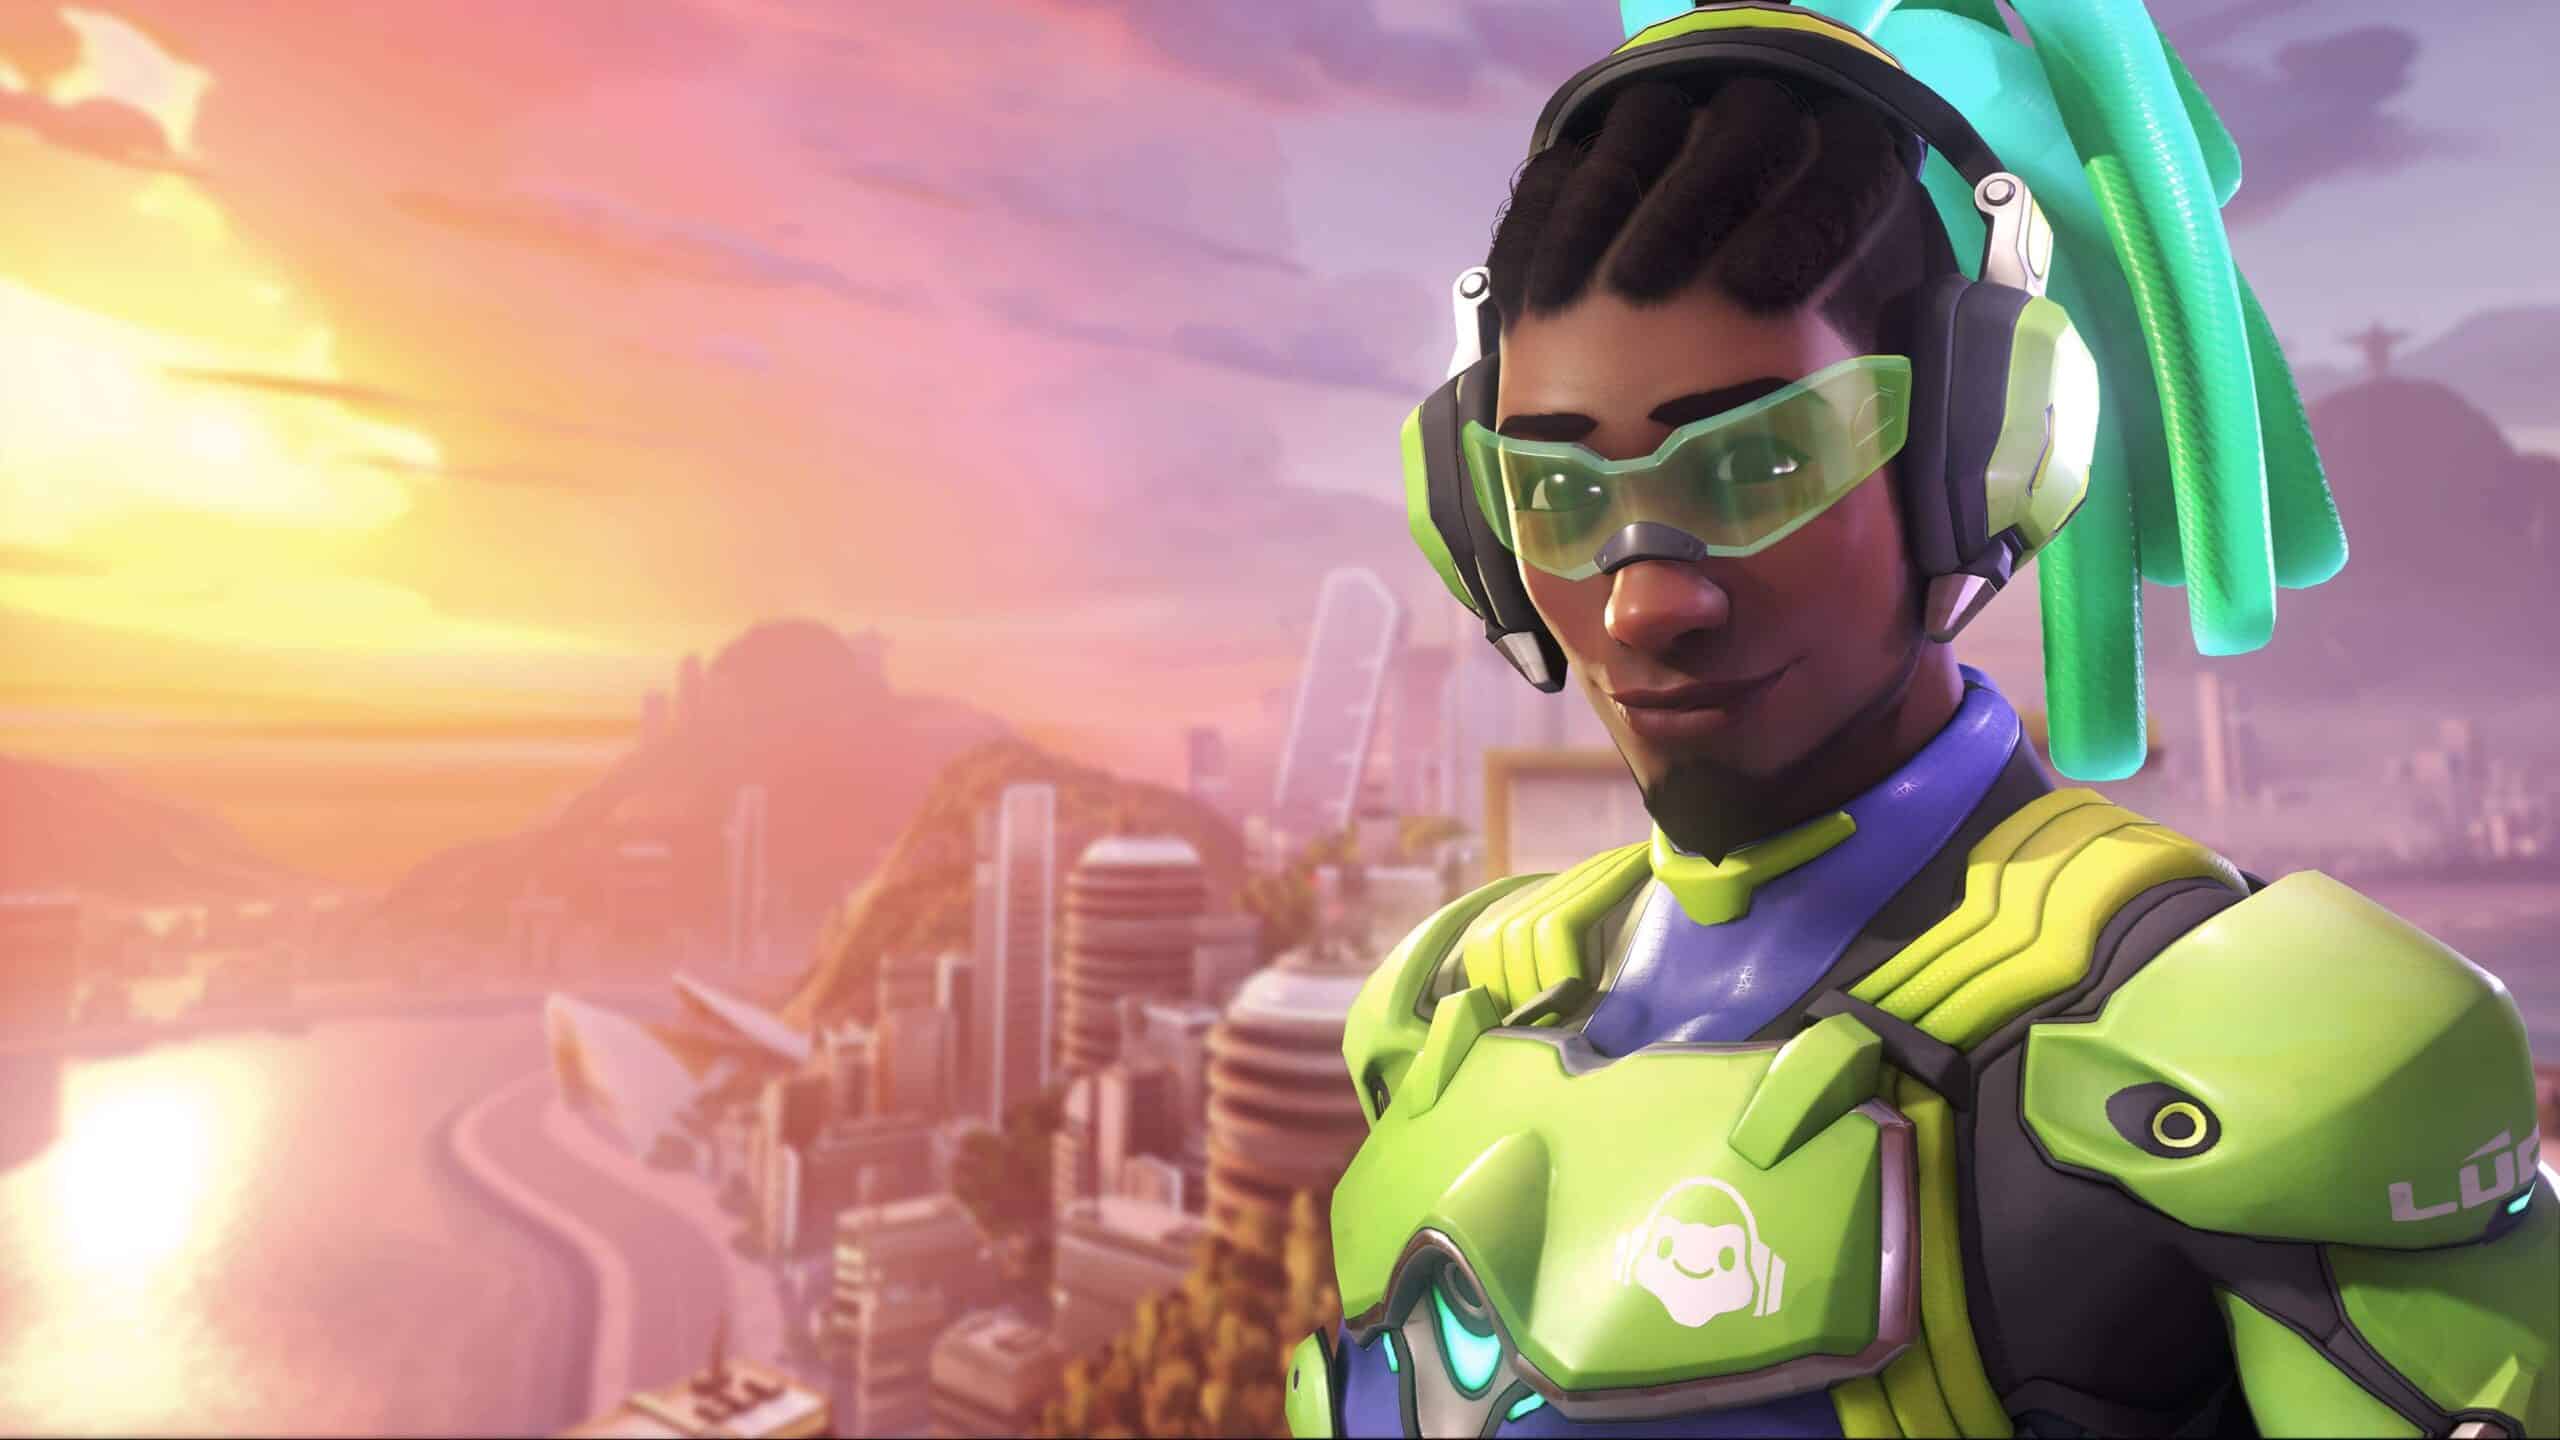 download free lucio overwatch 2